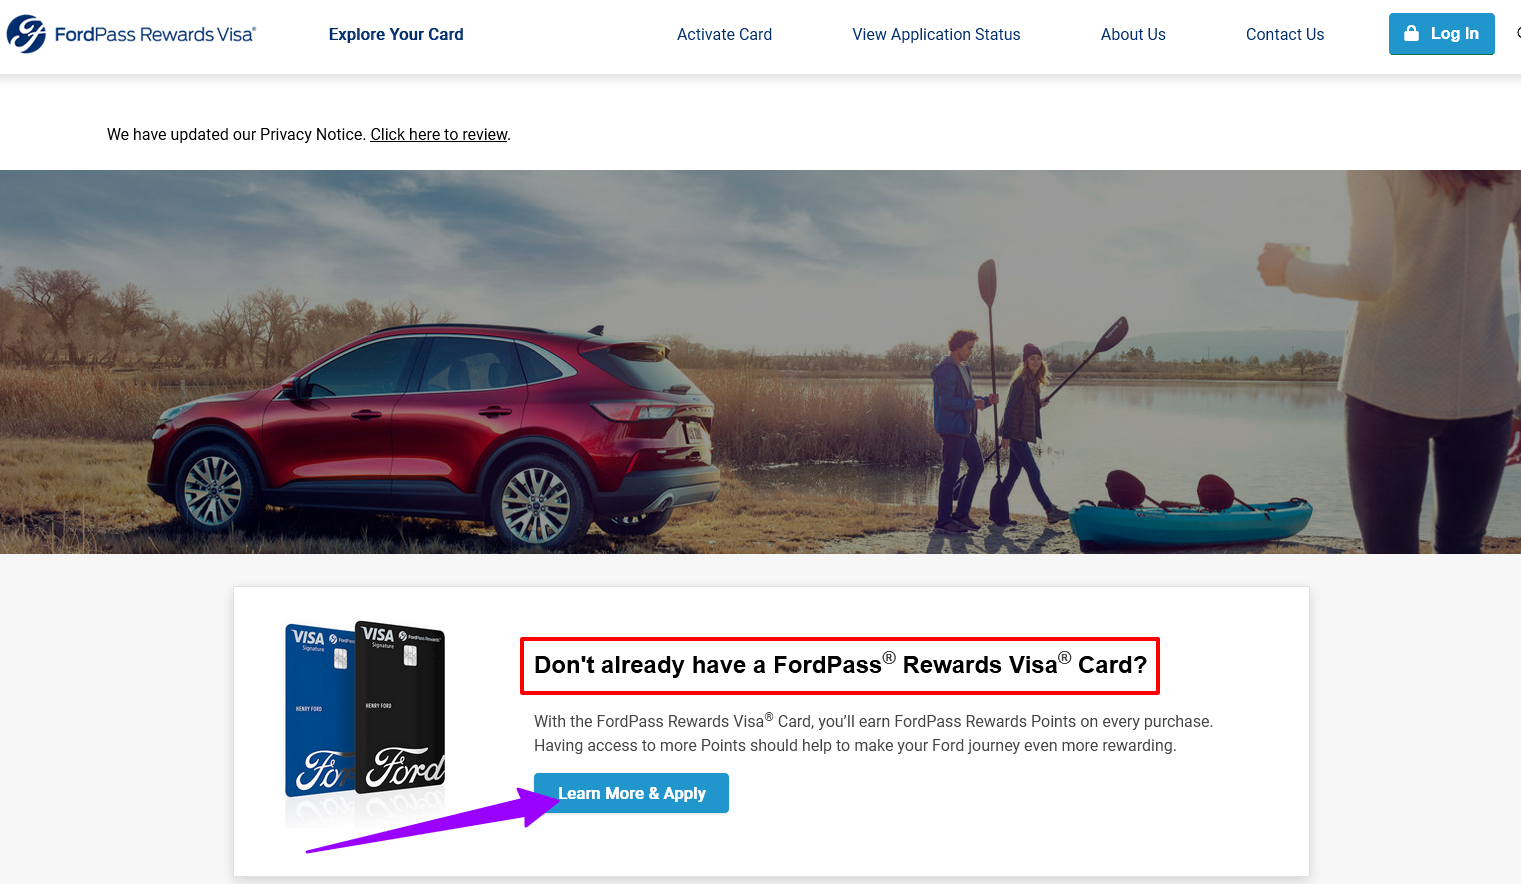 How to Apply for FordPass Rewards Visa Card